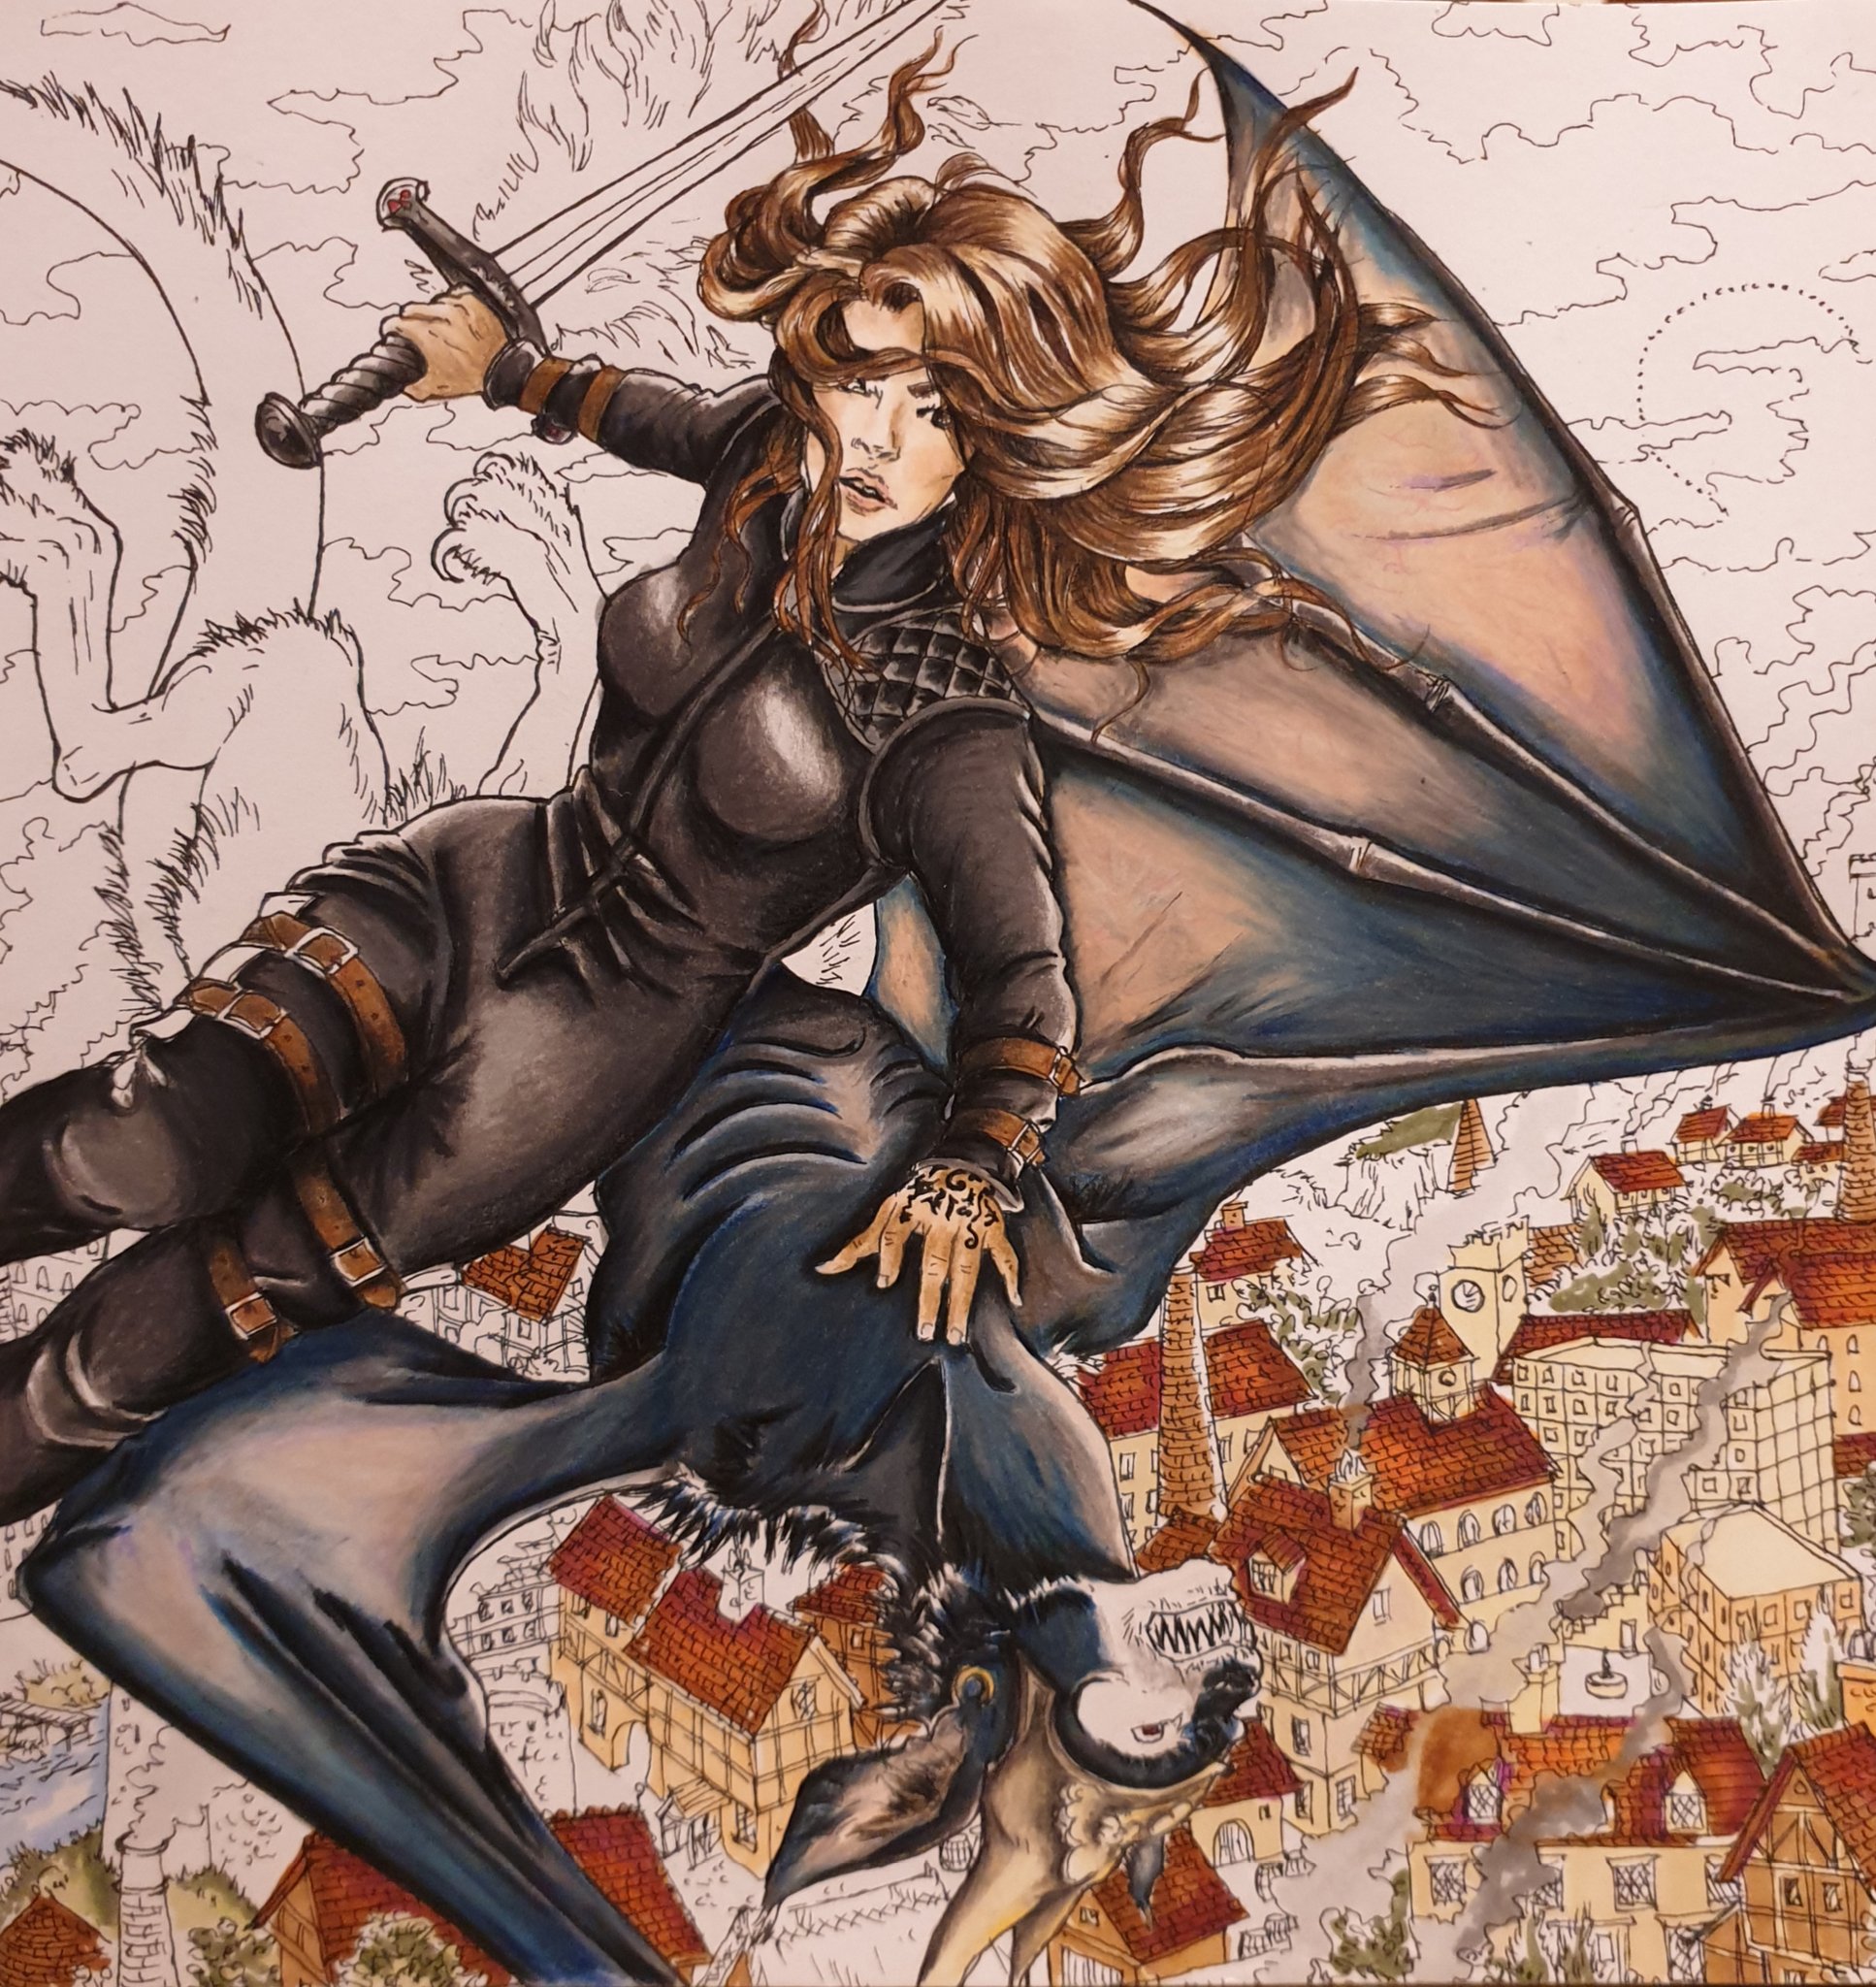 Anna (on hiatus) on X: My current #wip !! #feyre from #acotar #sarahjmaas # coloringbook Hoping @bloomsburykids / @BloomsburySyd will make more coloring  books because I need new #throneofglass coloring pages and want